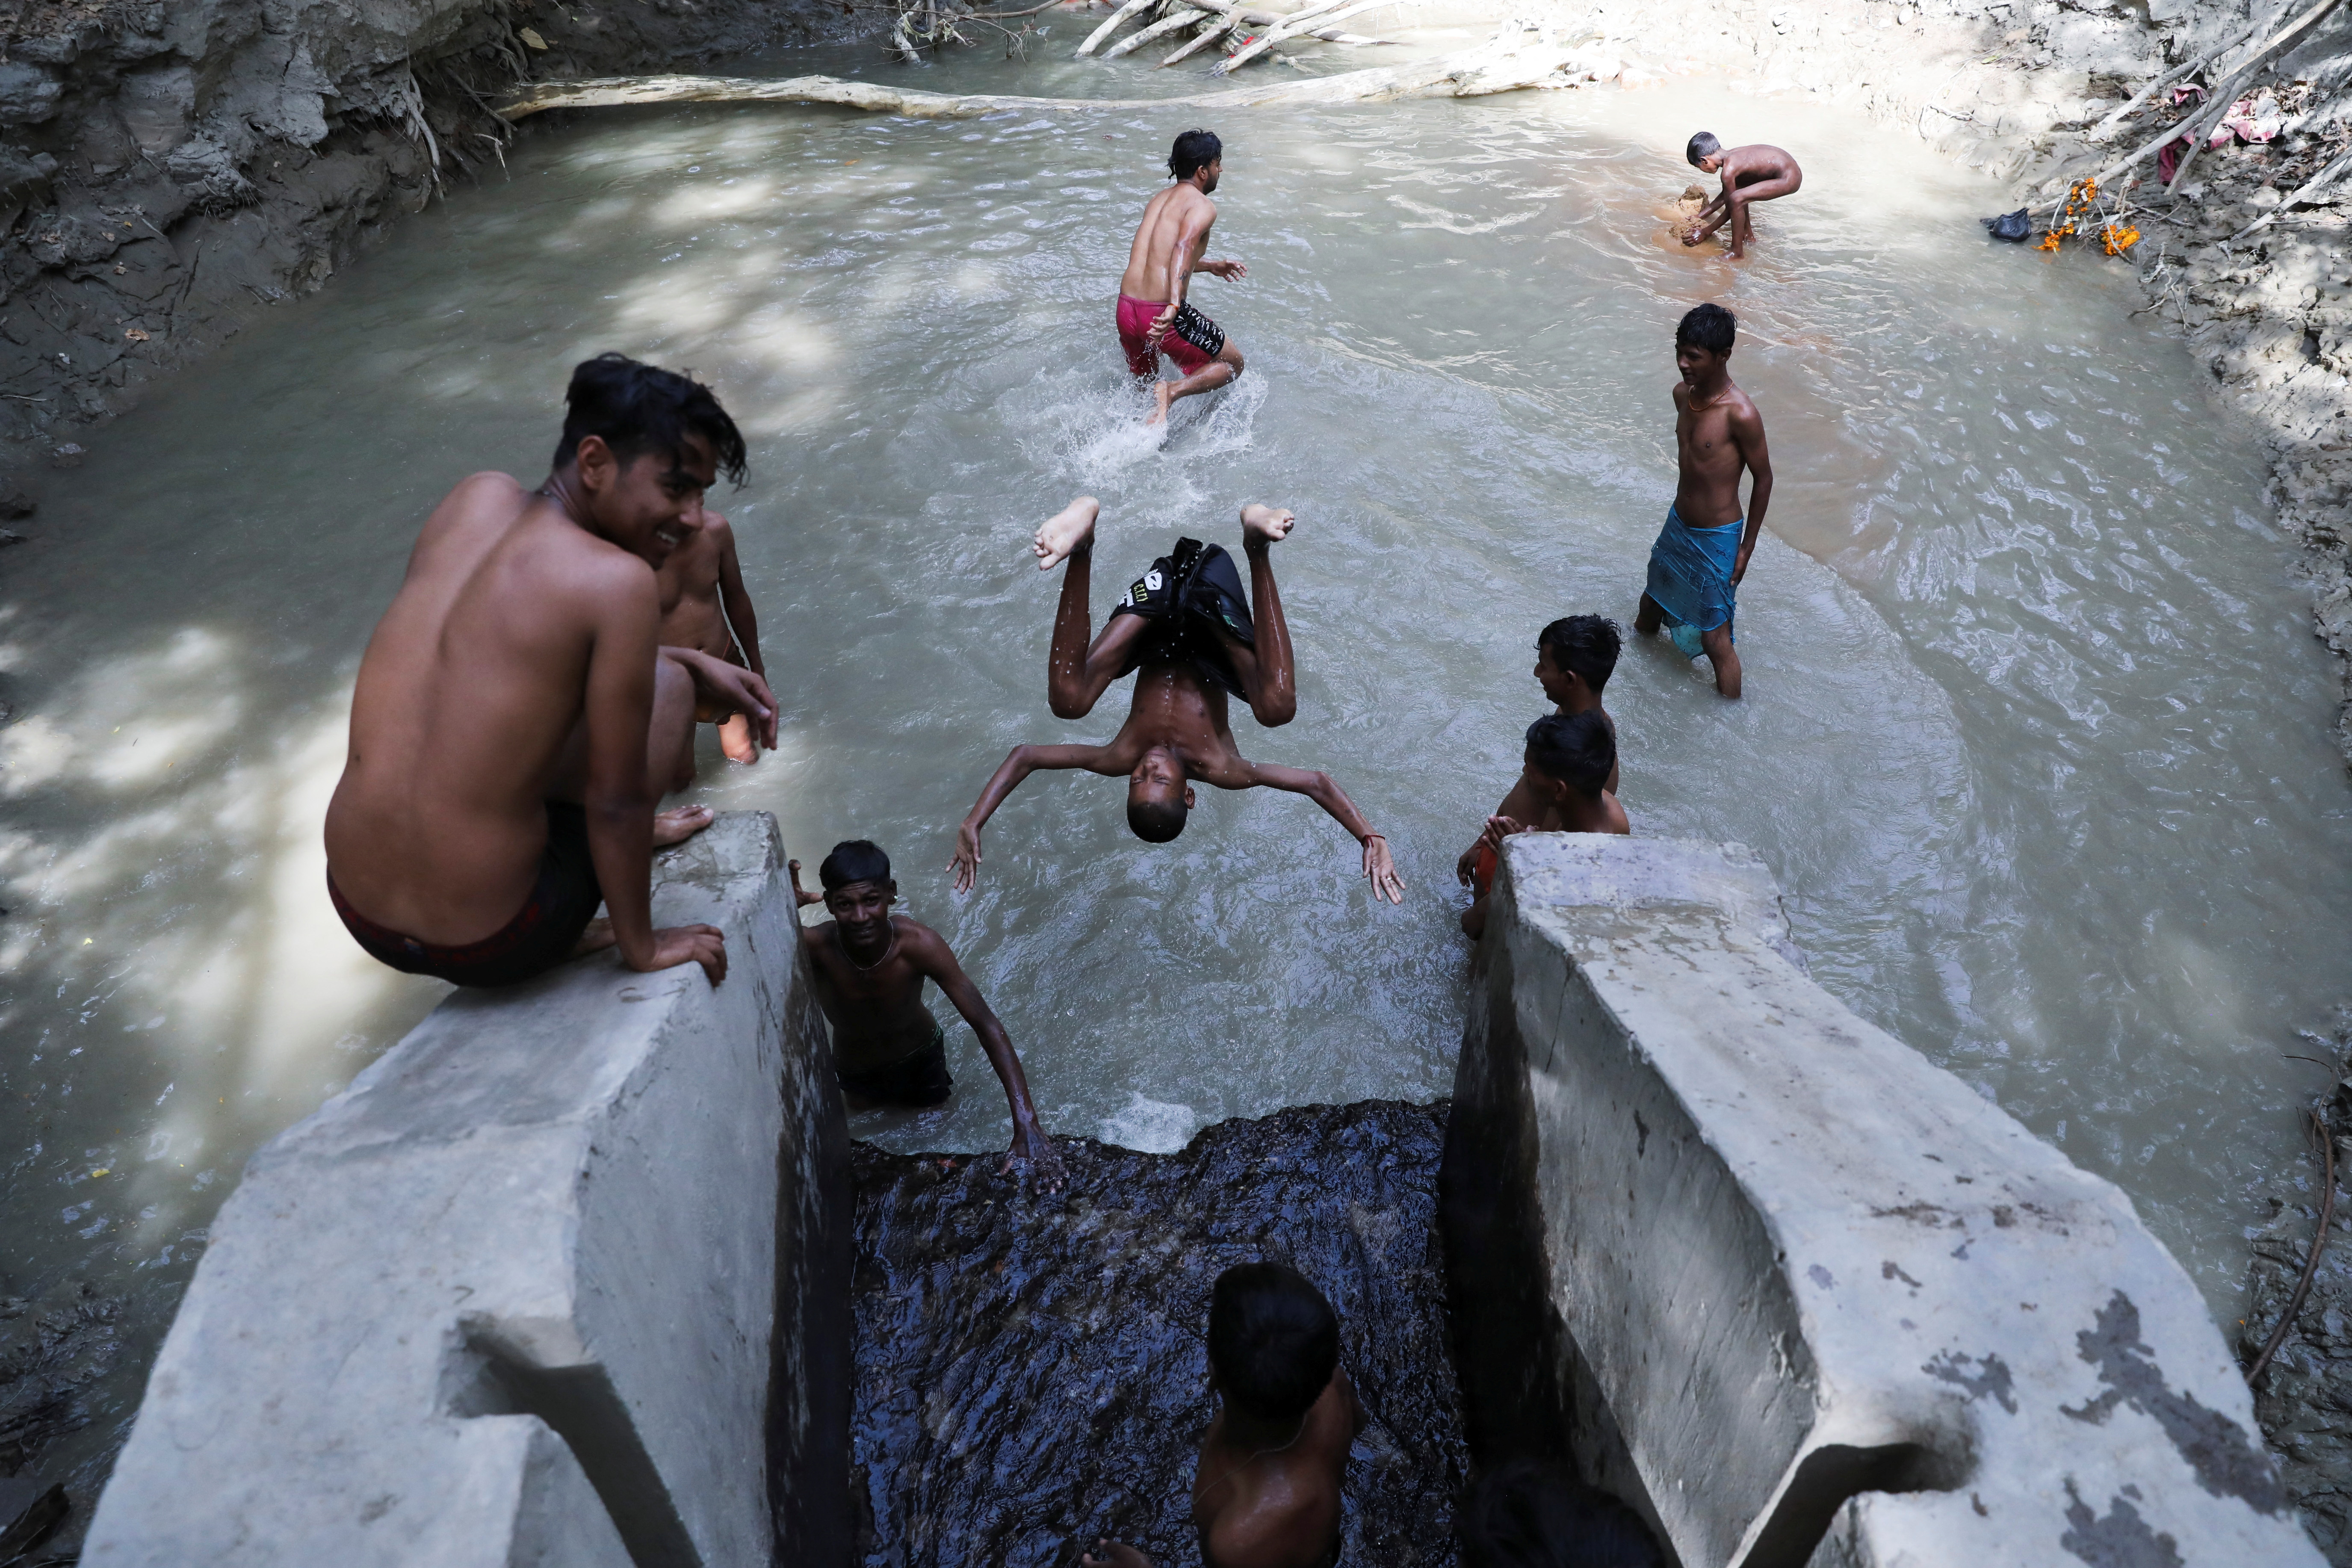 Boys cool themselves in a pool of water near a highway on a hot summer day, in New Delhi